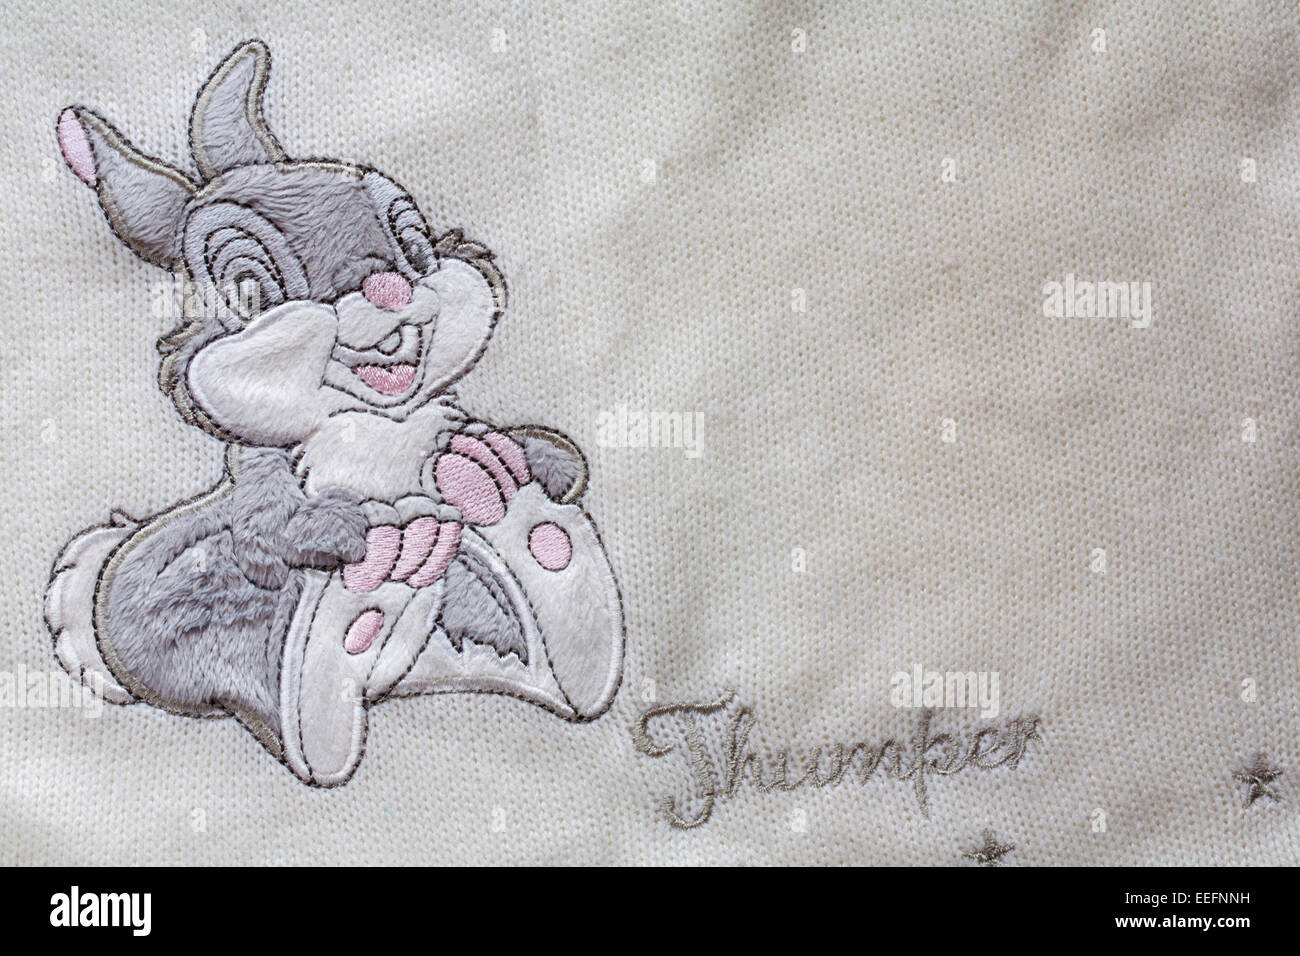 detail of Thumper character on child's clothing Stock Photo